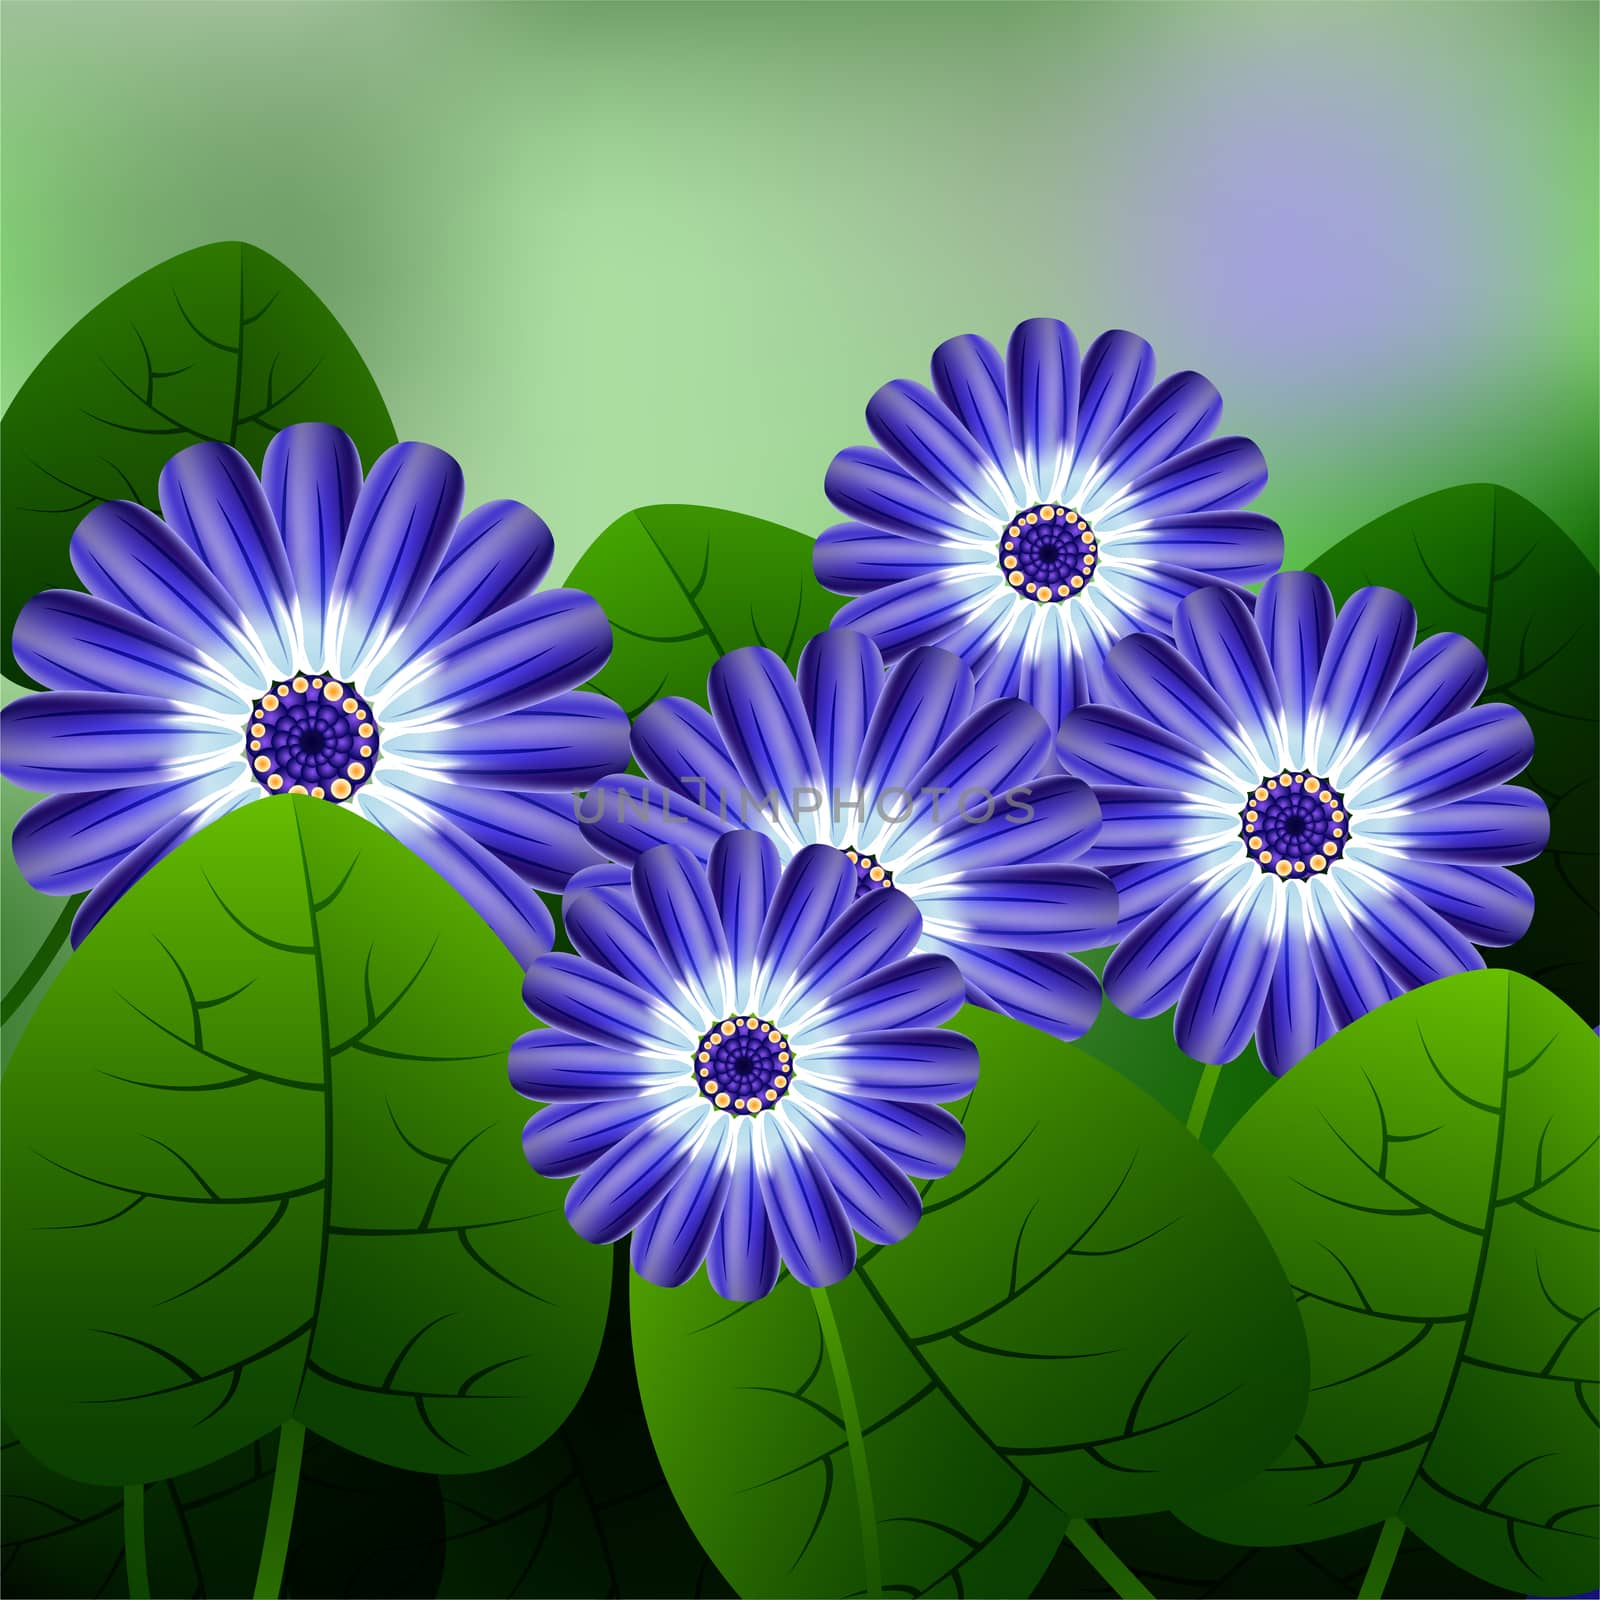 Beautiful spring flowers Cineraria. Cards or your design with space for text. by Adamchuk